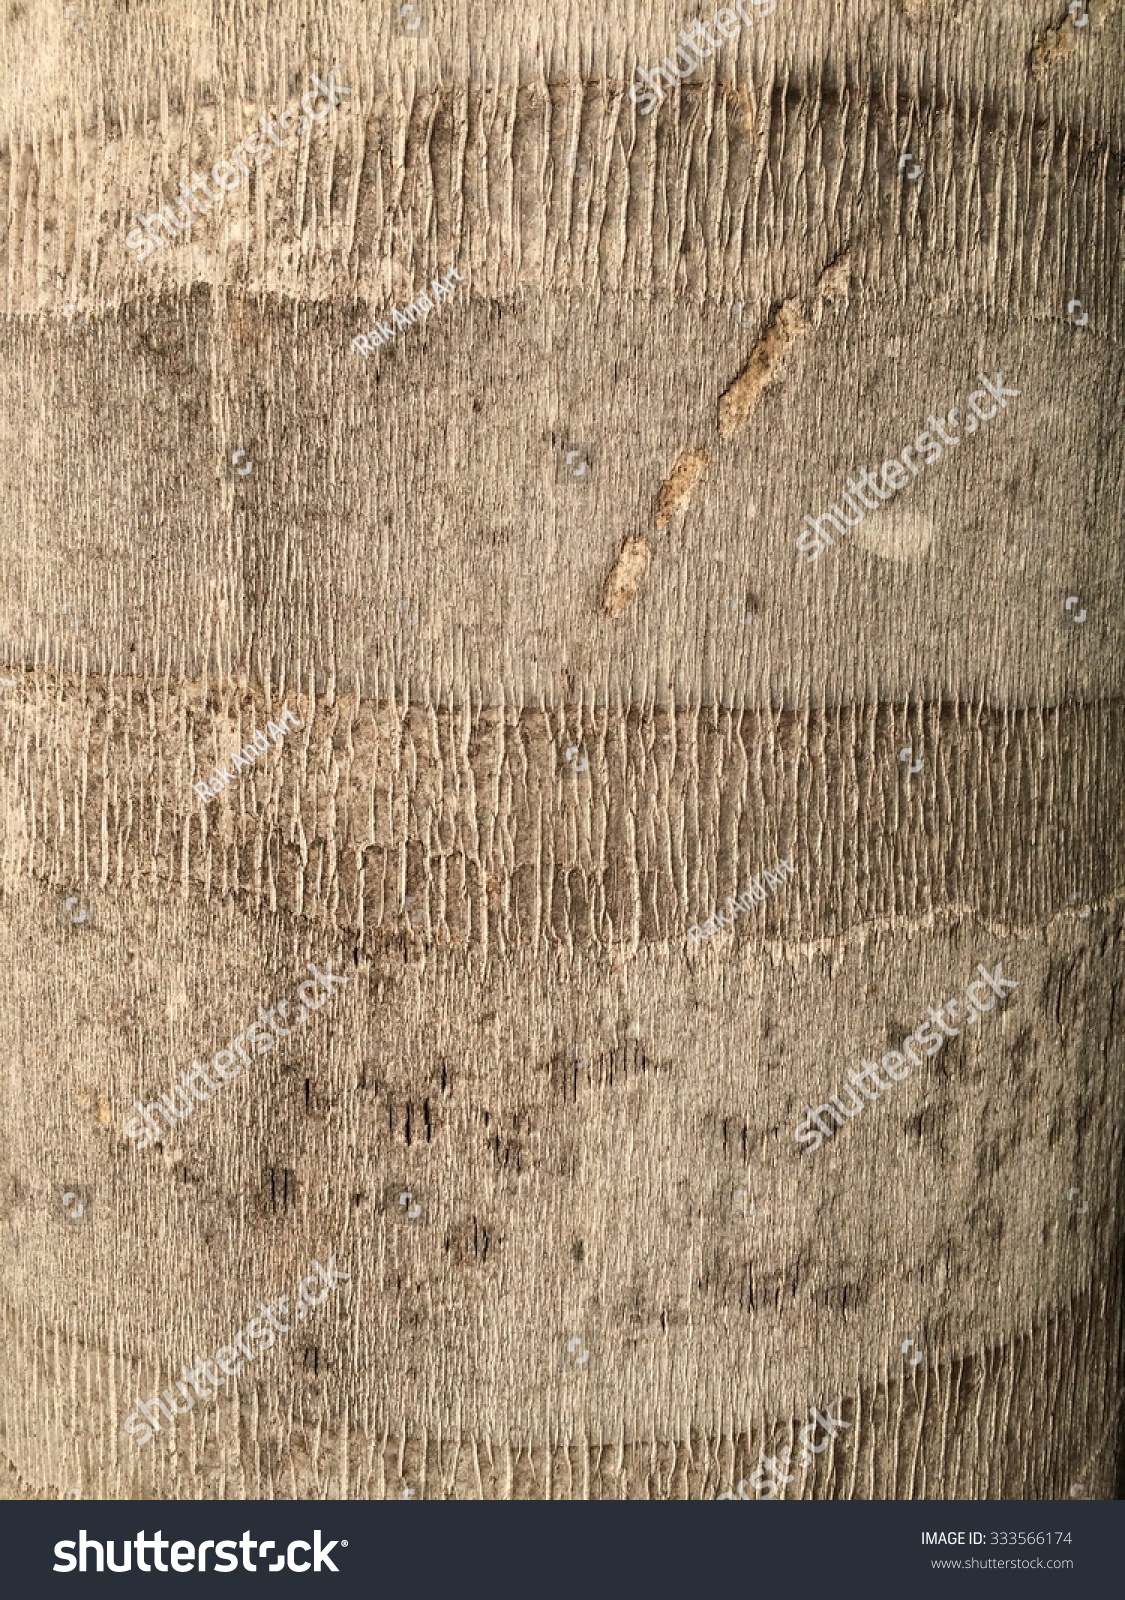 Close-Up Texture Of Coconut. Stock Photo 333566174 : Shutterstock